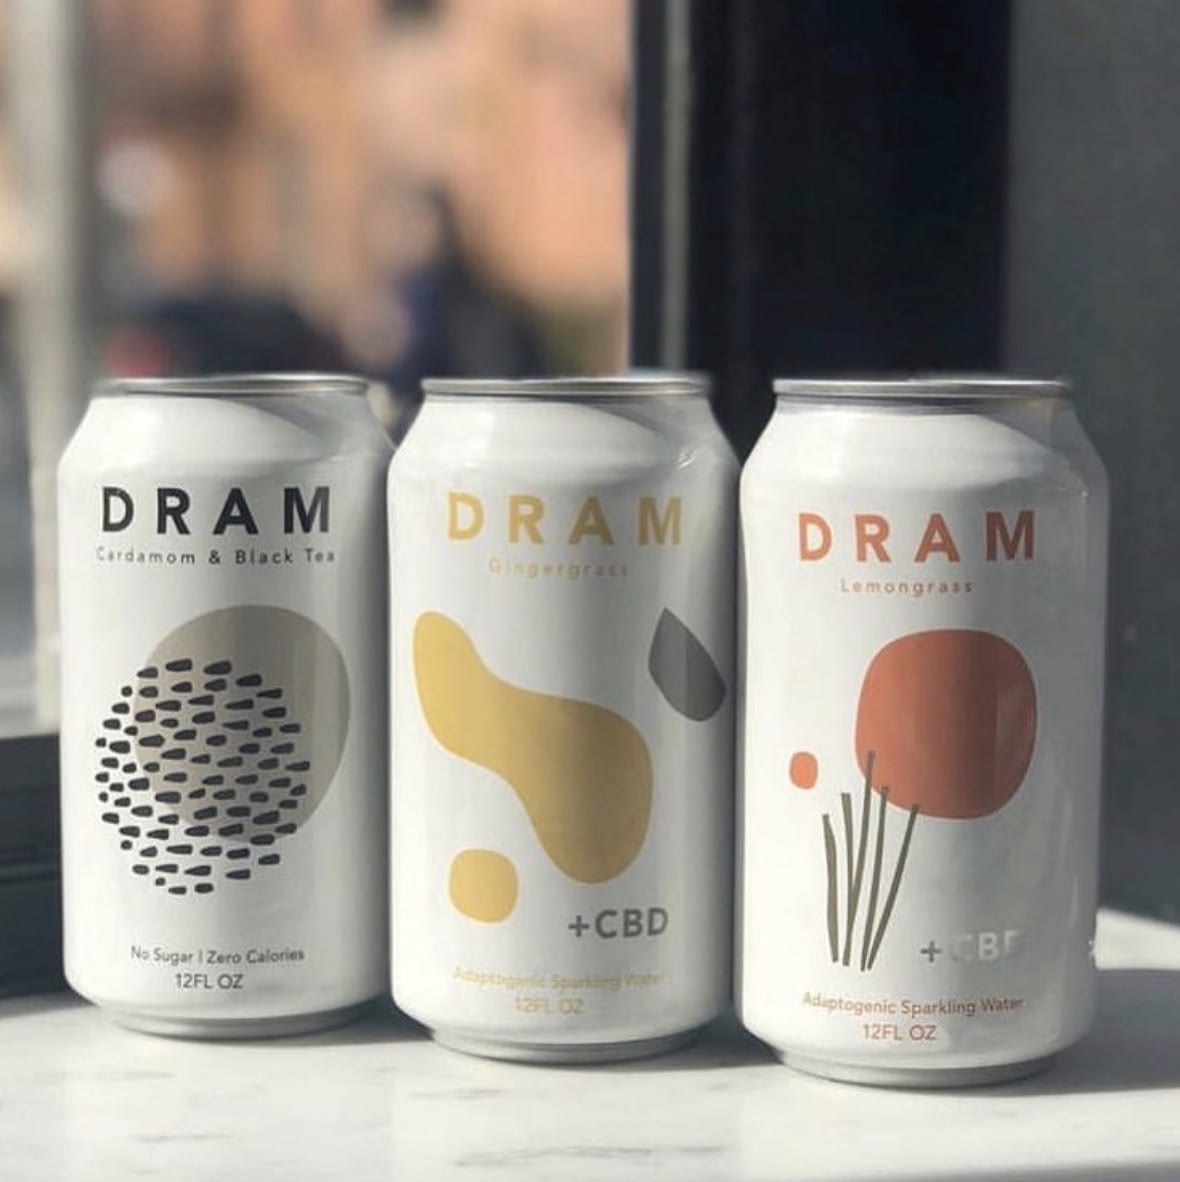 3 cans of Dram Sparkling Water with shrink sleeves custom labels.